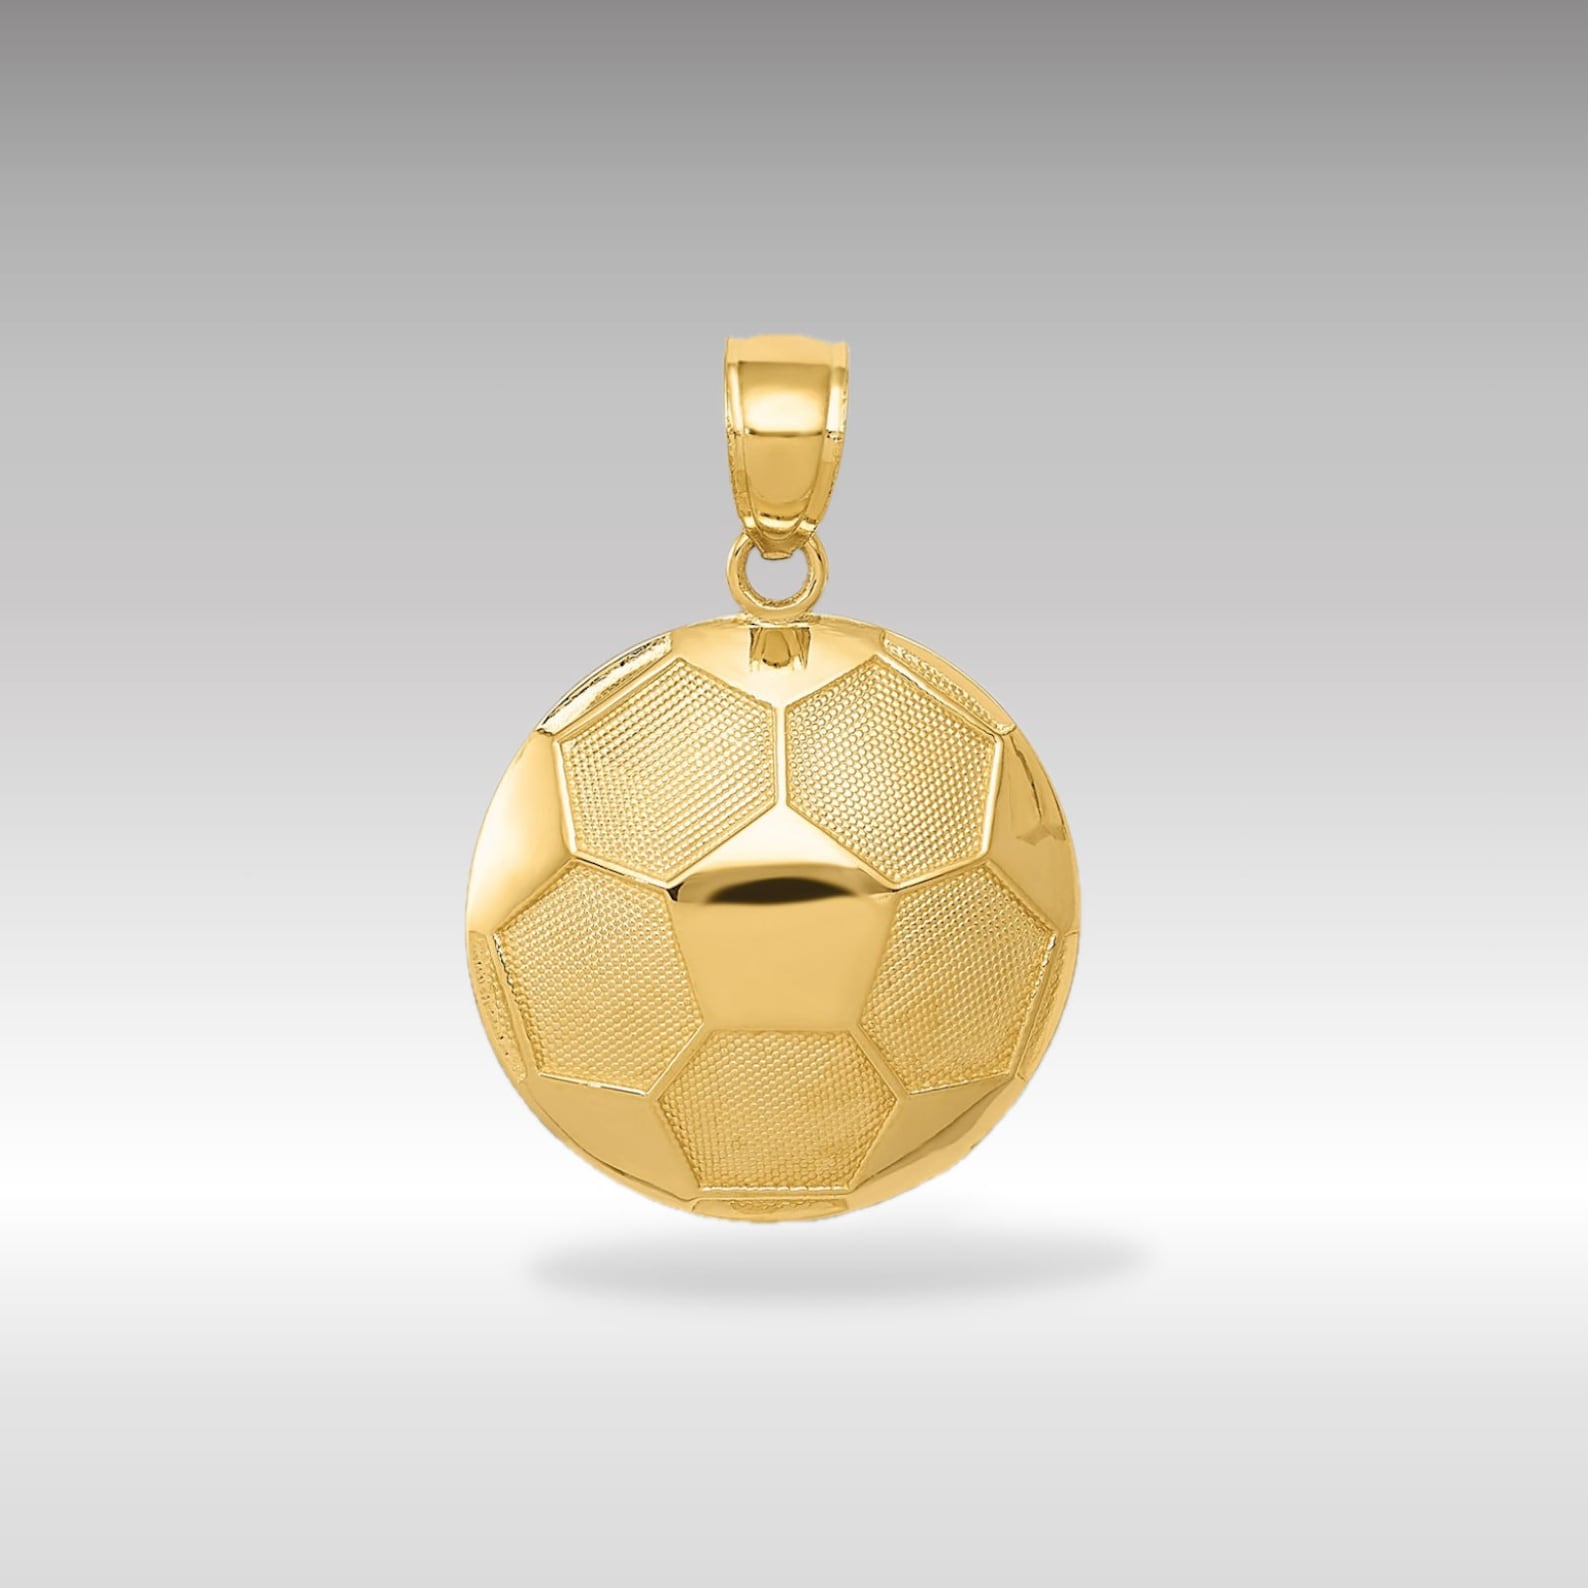 Gold Large Soccer Ball Pendant Model-C3580 - Charlie & Co. Jewelry